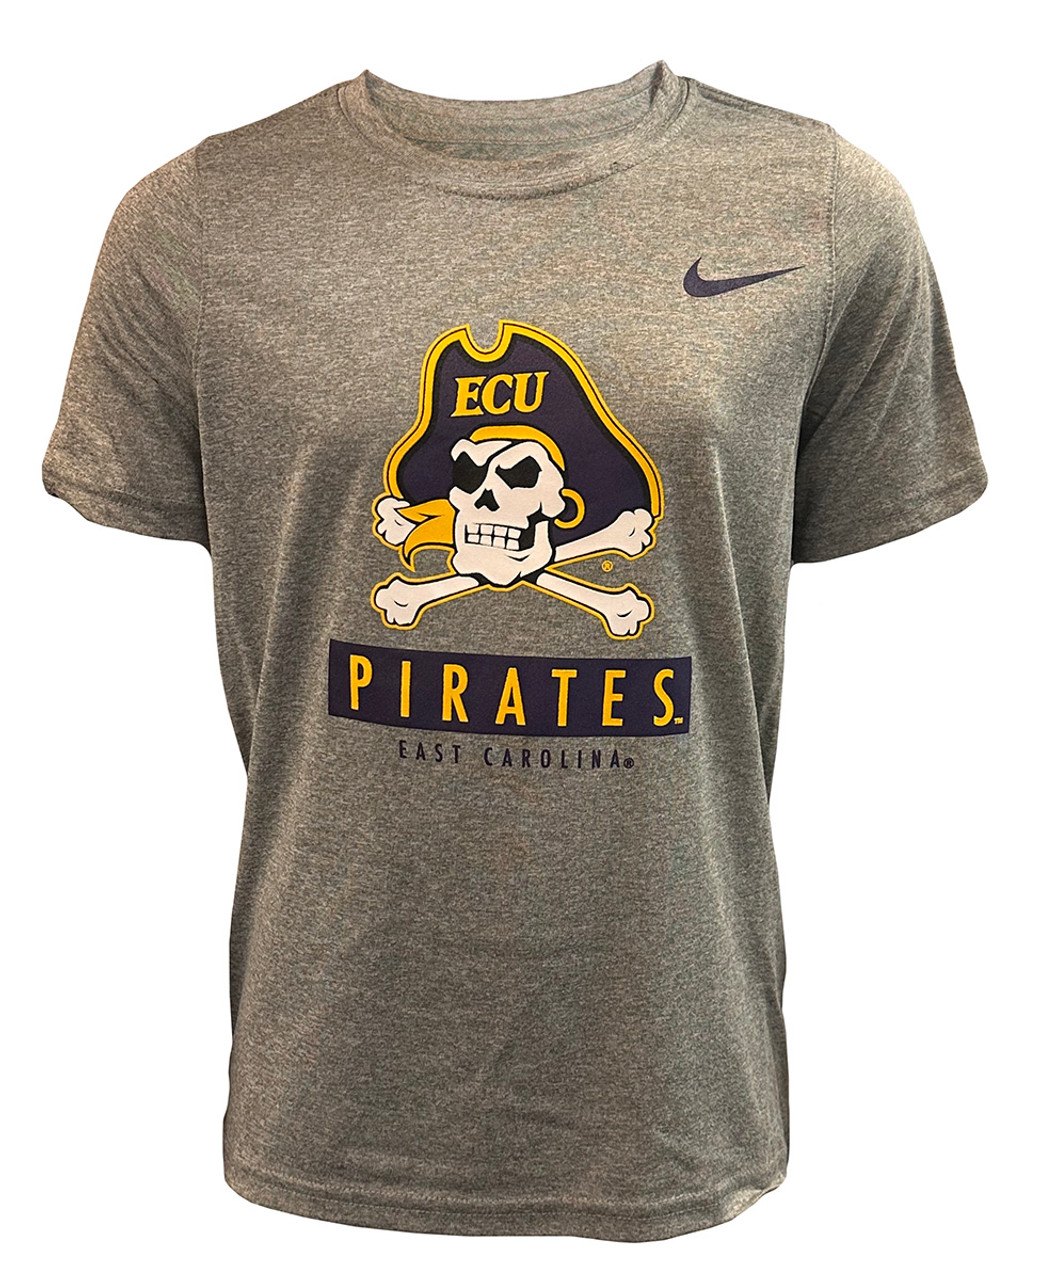 Youth Grey Nike Legend Short Sleeve Tee with Jolly Roger